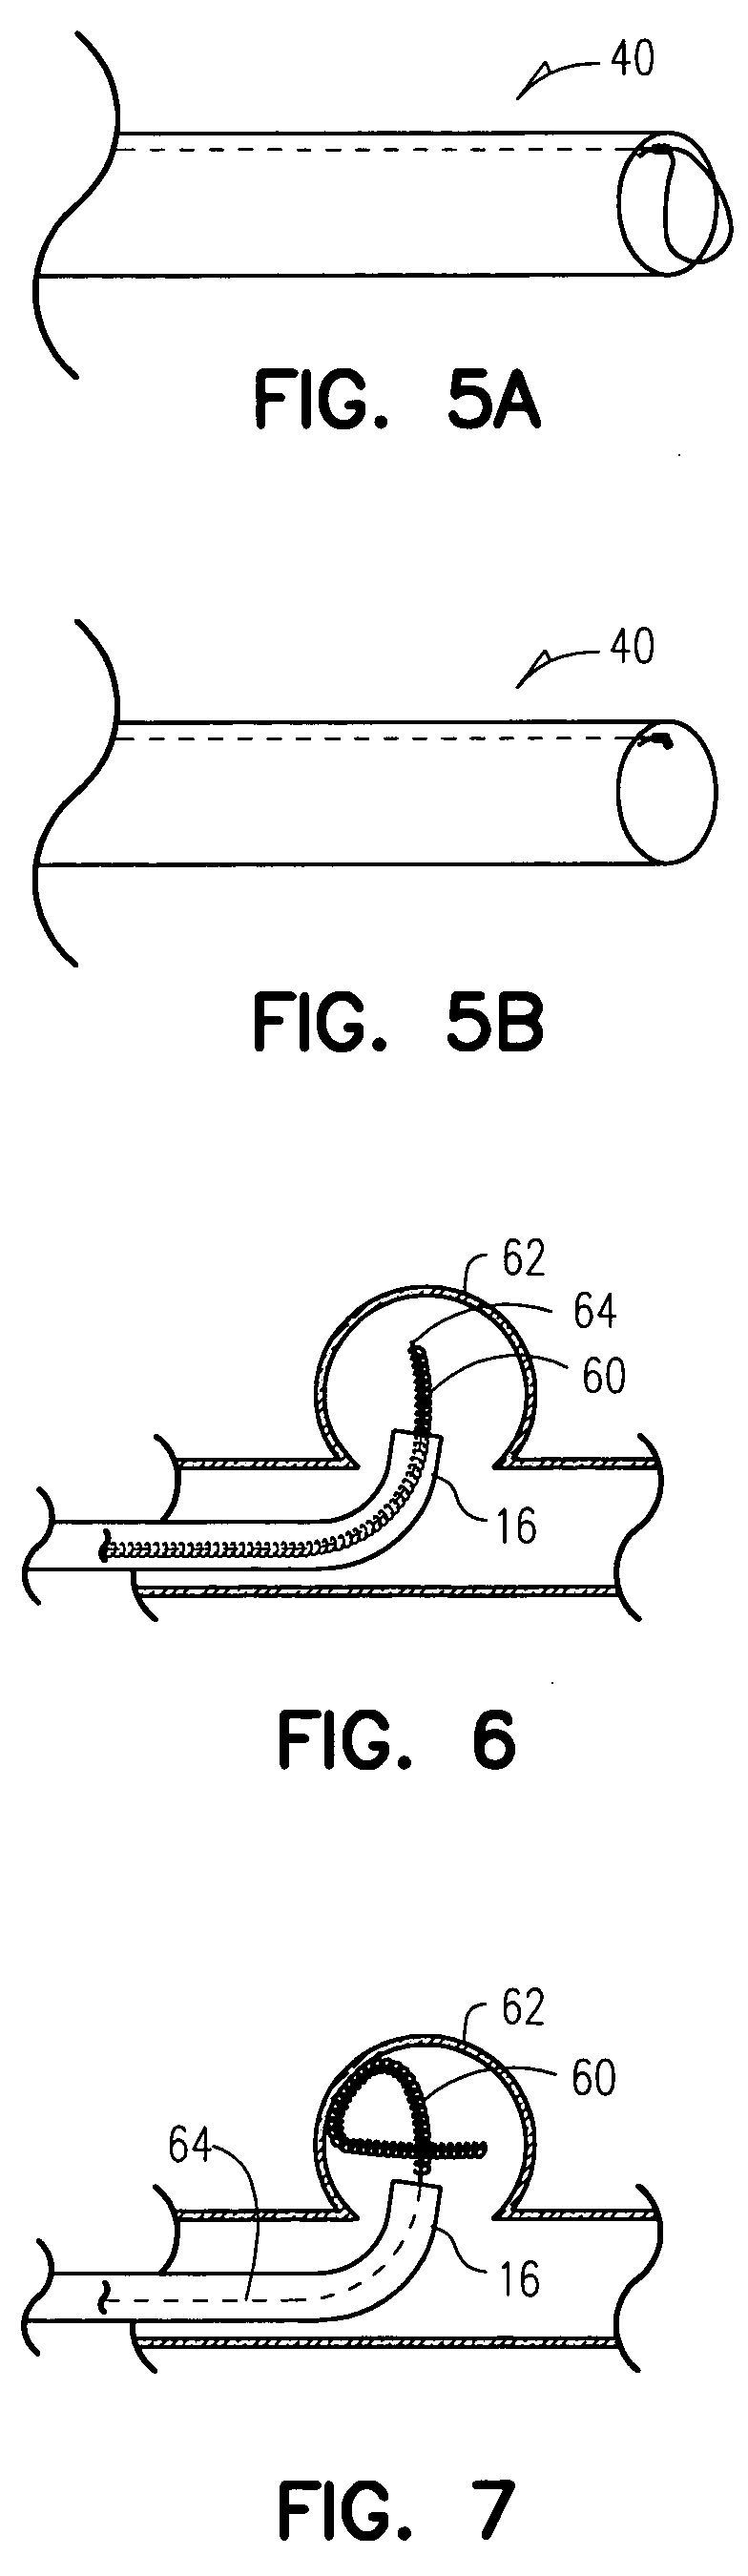 Aneurysm embolization material and device